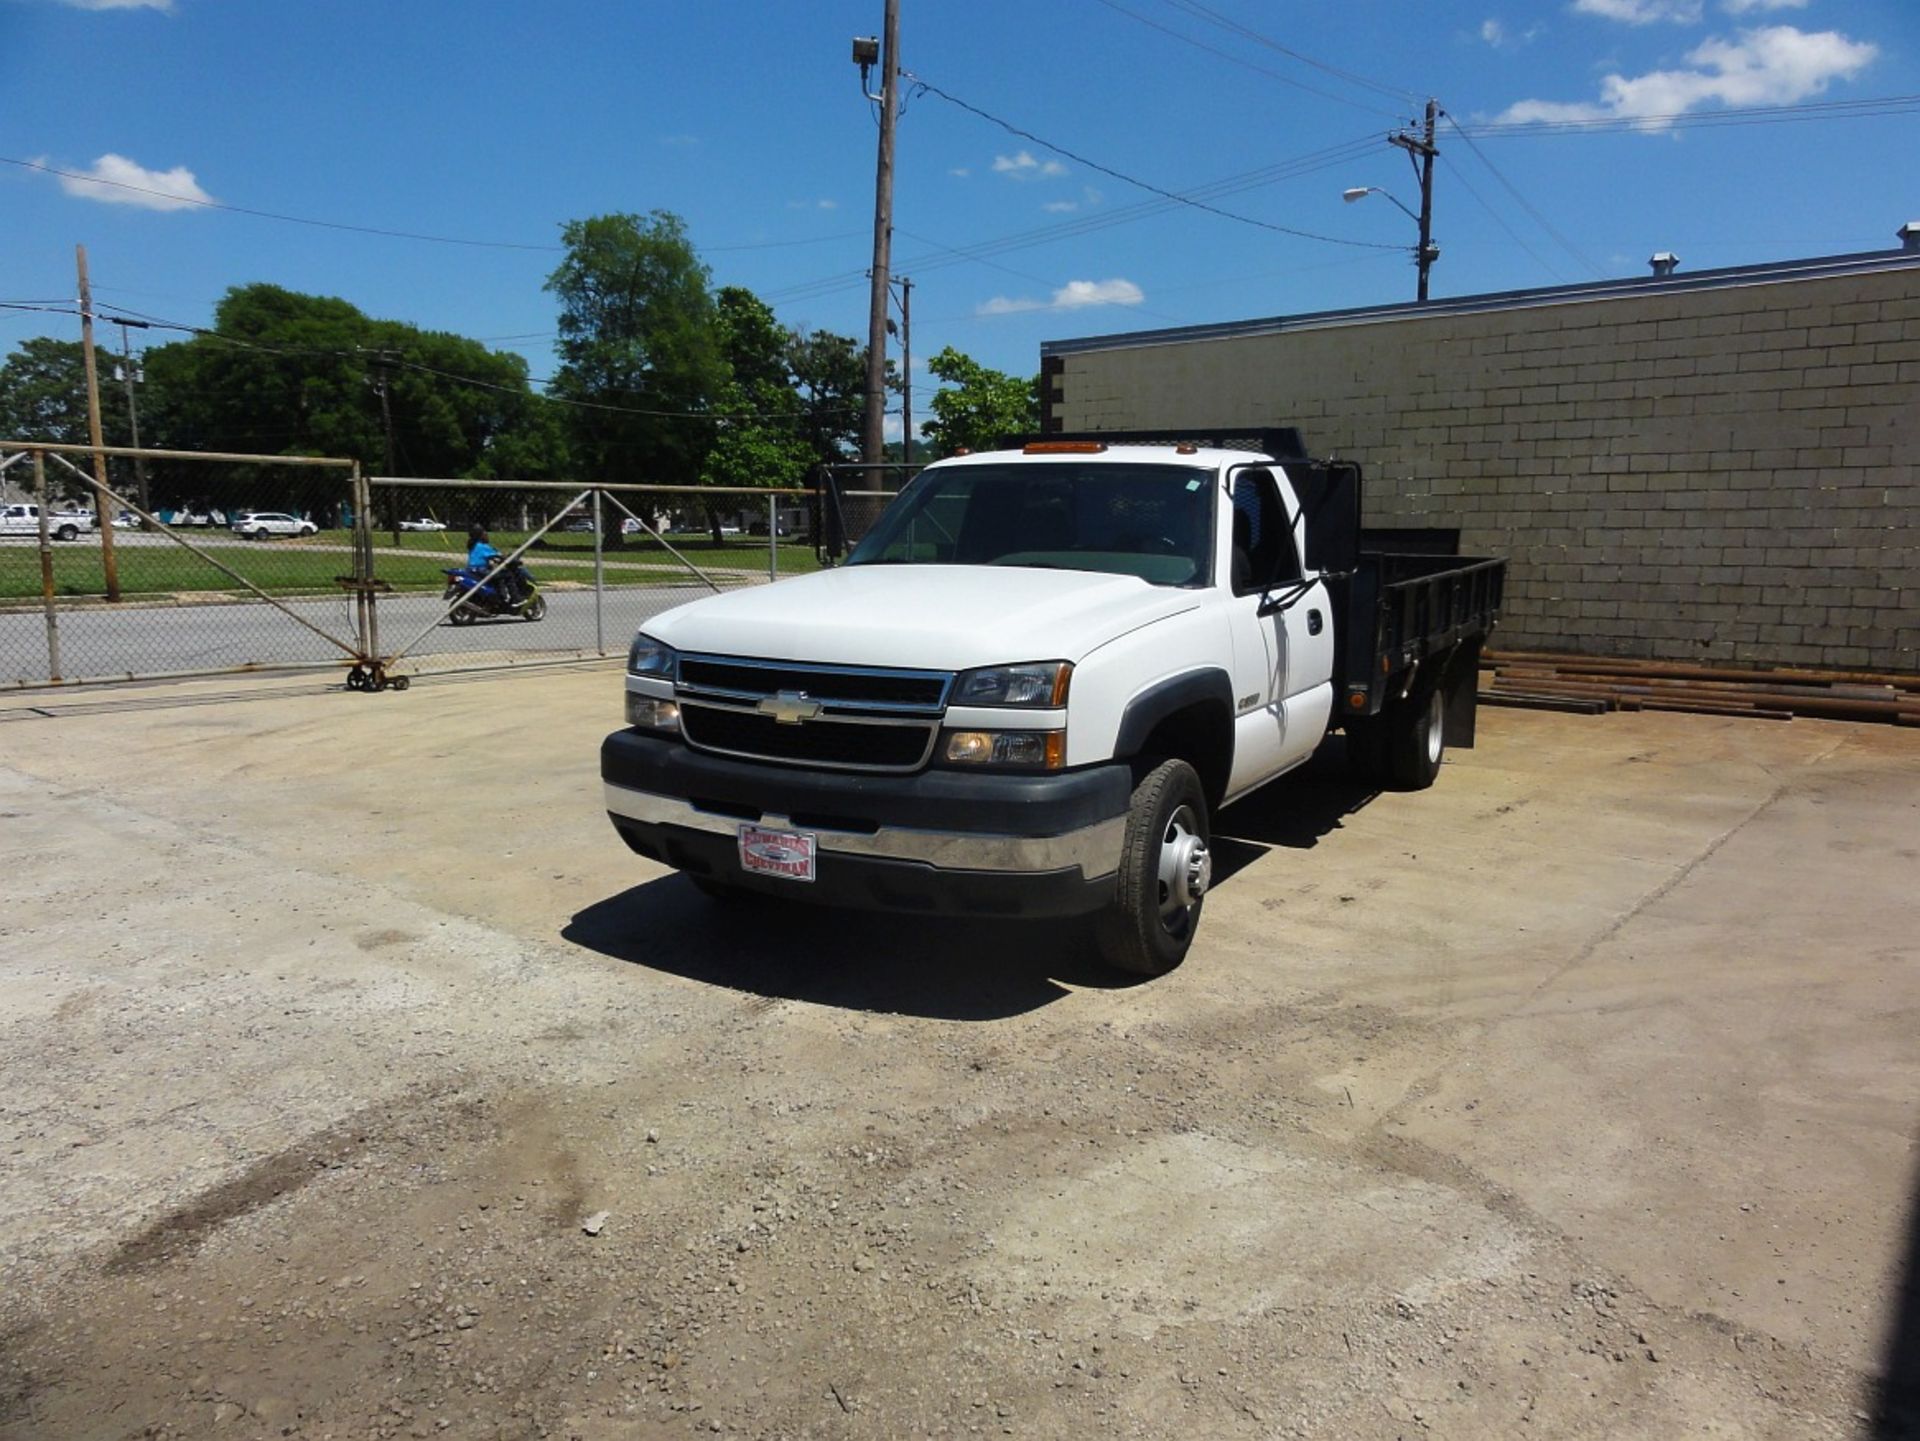 2006 Chevy 3500 Dually Truck, 1-ton, V8, Automatic, 12' Stake bed w/ Sides, 91" Box, 22,489 miles, - Image 2 of 4